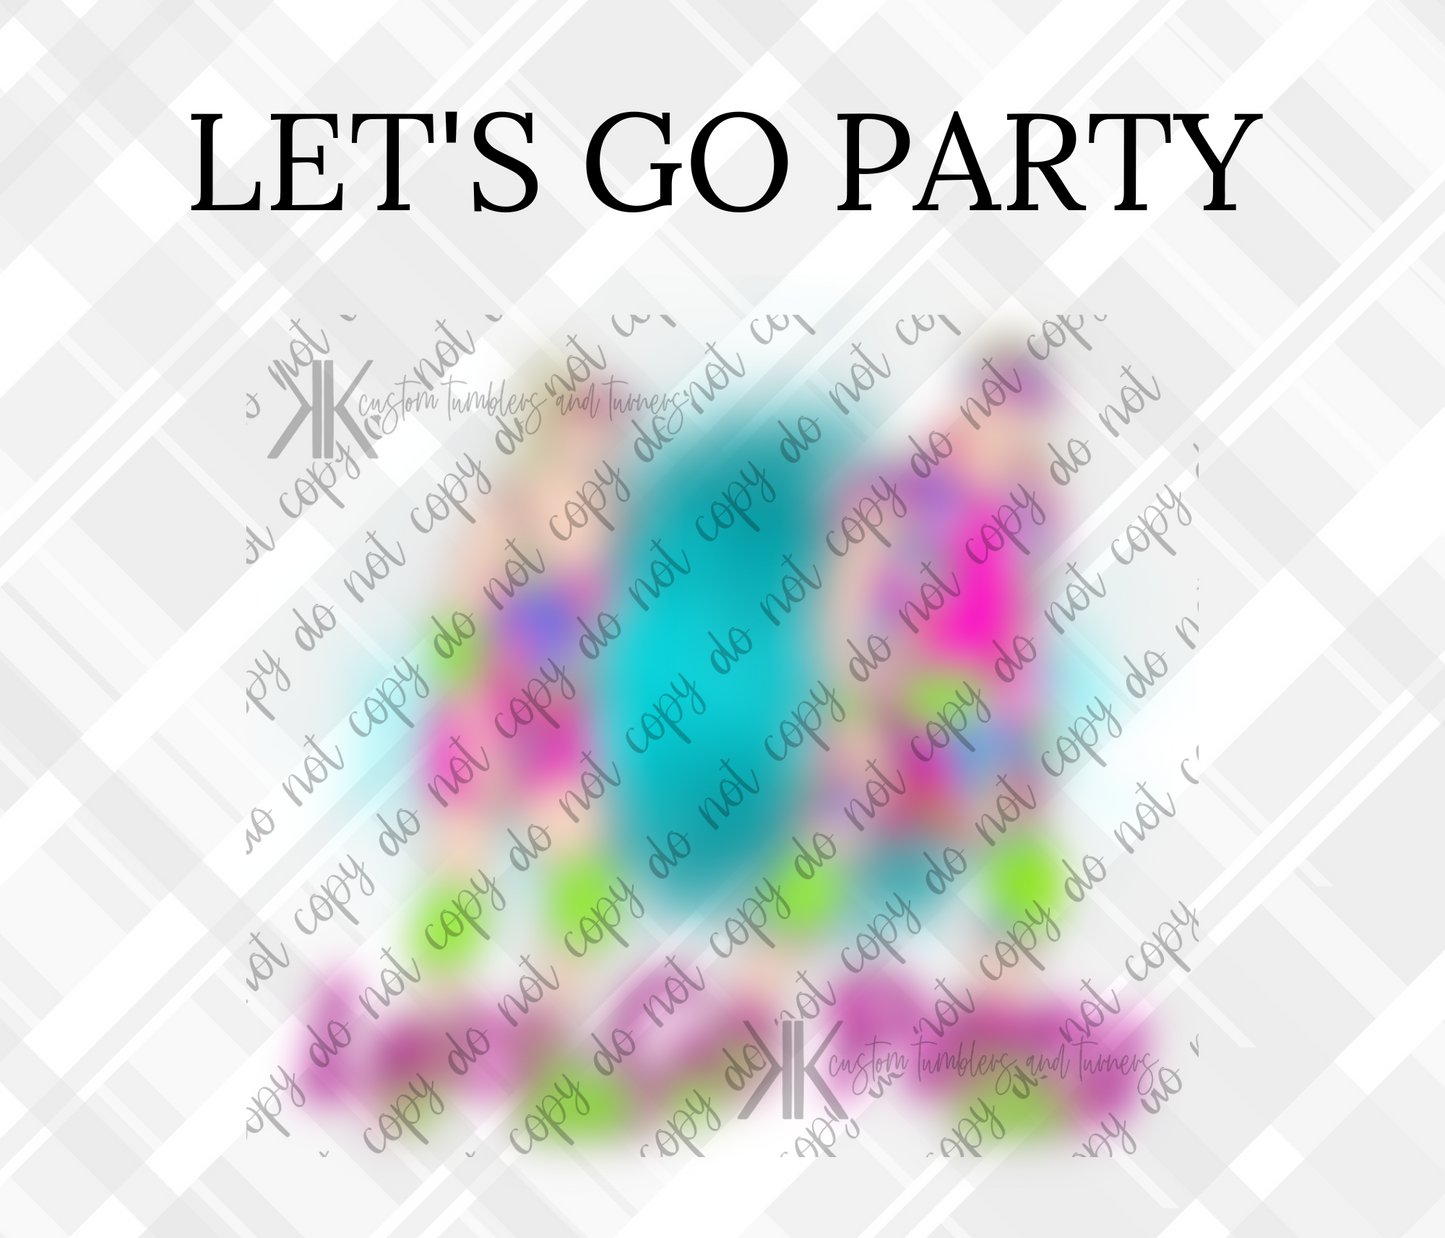 LET'S GO PARTY